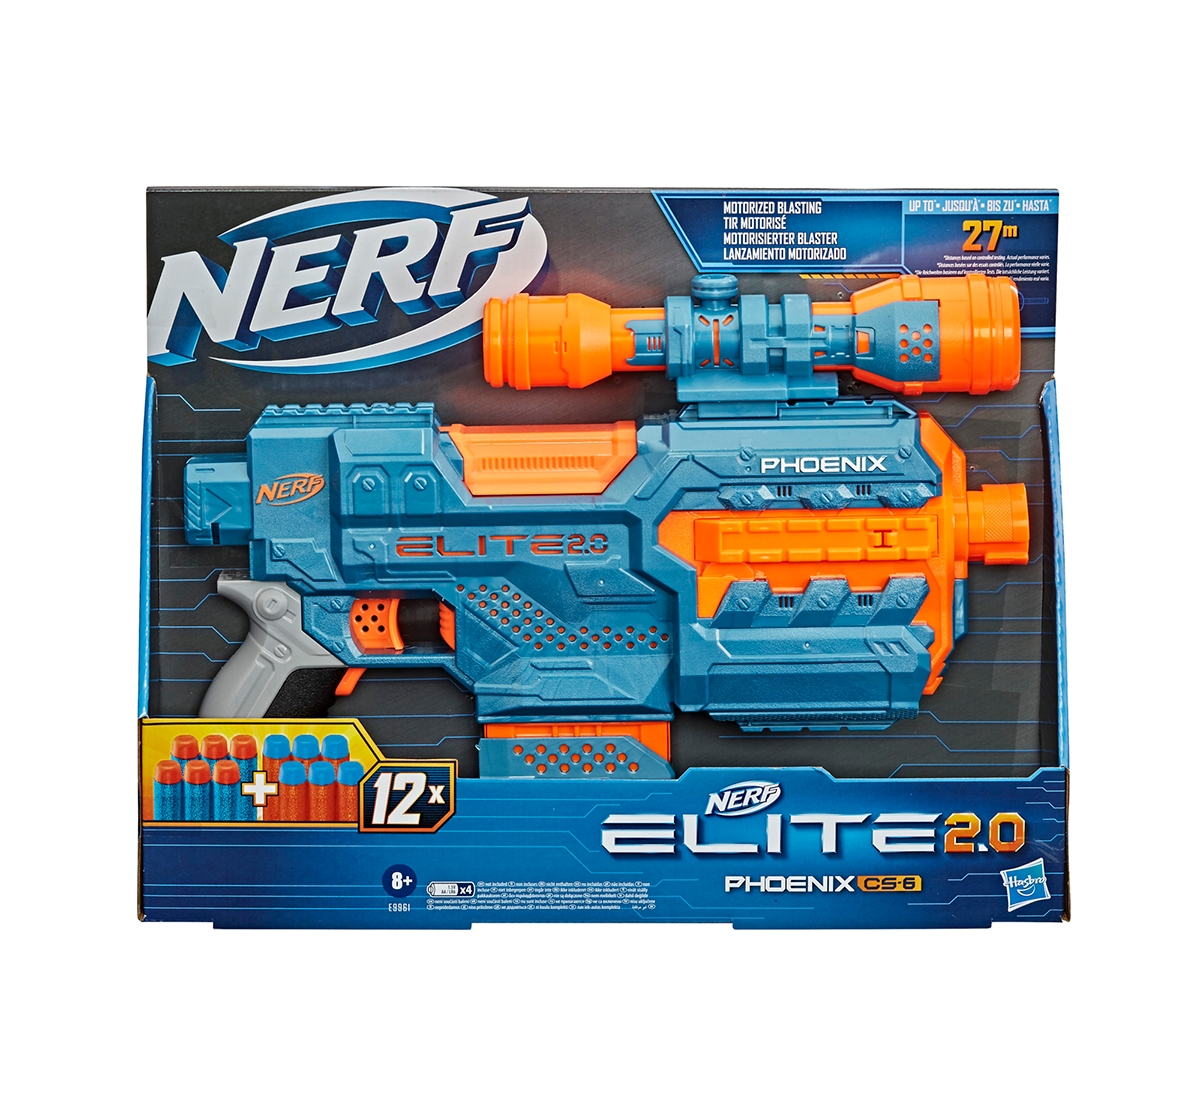 Nerf Elite 2.0 Phoenix CS-6 Motorized Blaster, 12 Official Nerf Darts, 6-Dart Clip, Scope, Tactical Rails, Barrel and Stock Attachment Points Blasters for BOYS age 8Y+ 